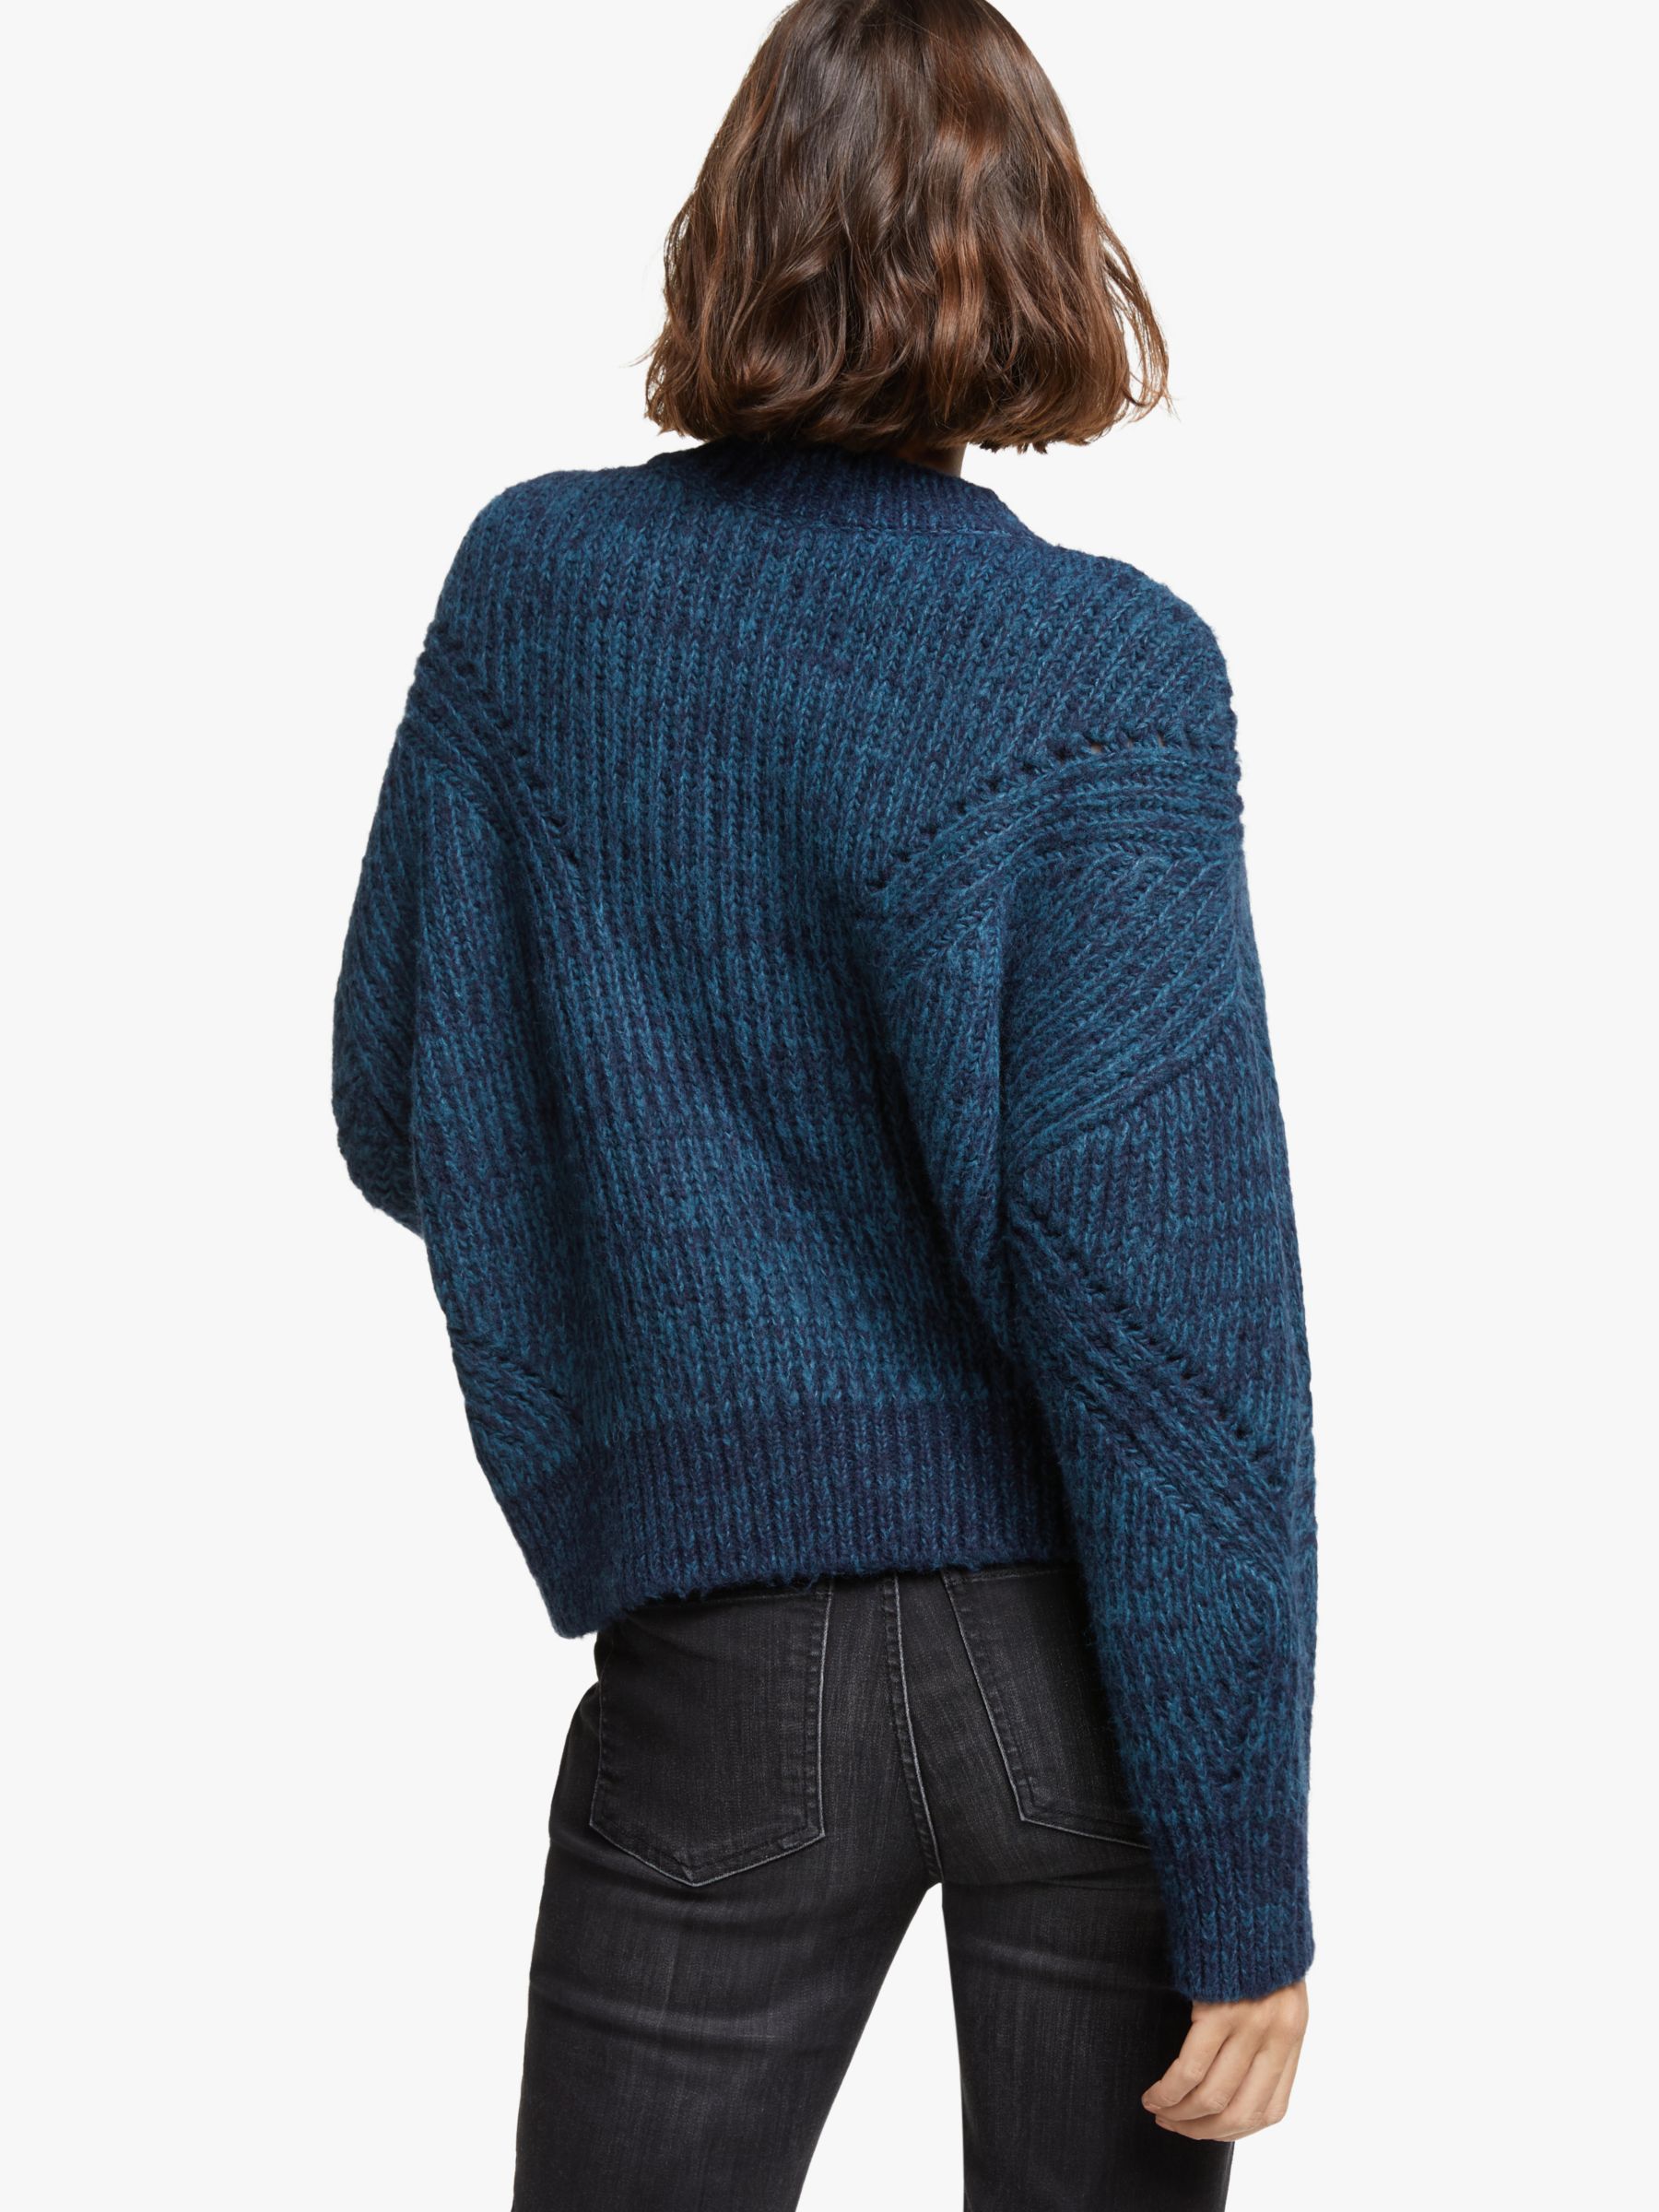 AND/OR Annabel Textured Knit Jumper, Blue